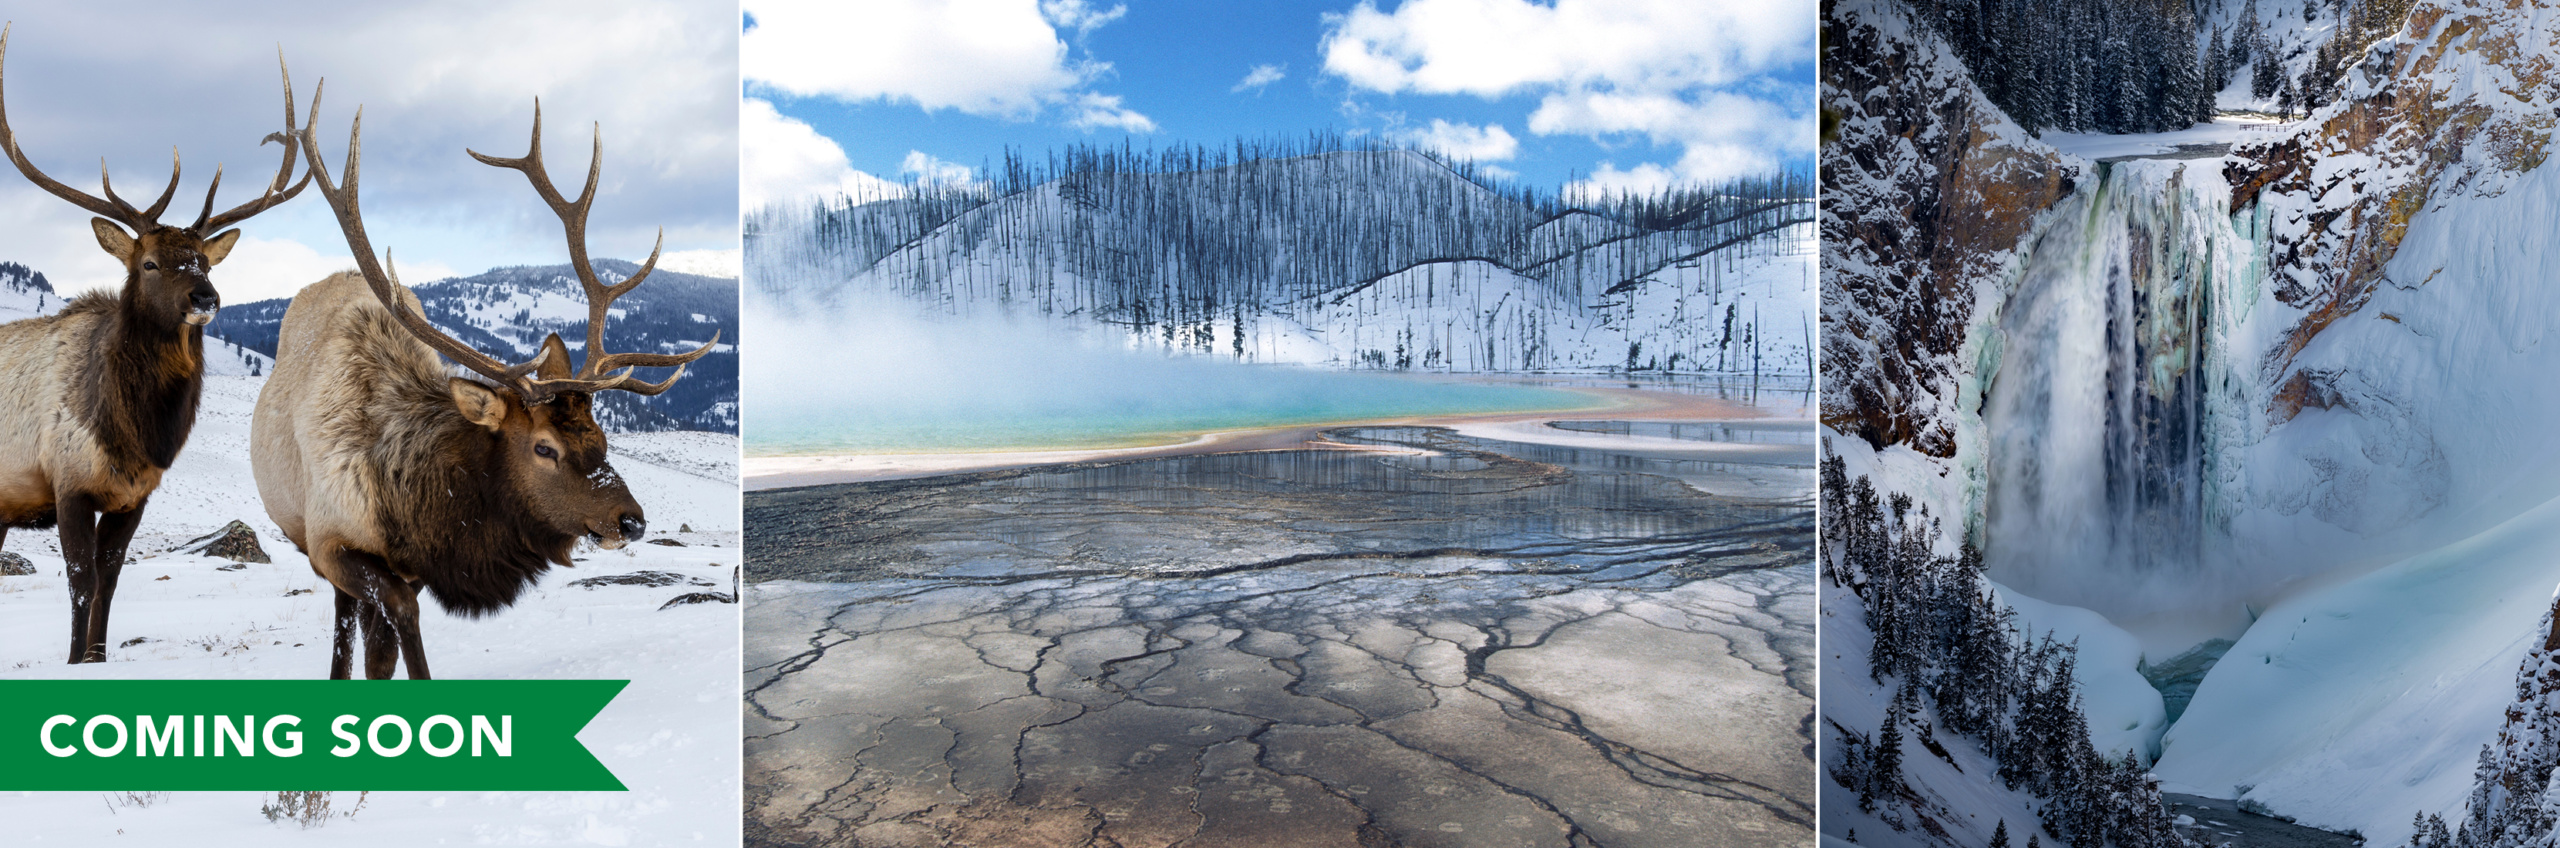 Views of Yellowstone National Park during the winter